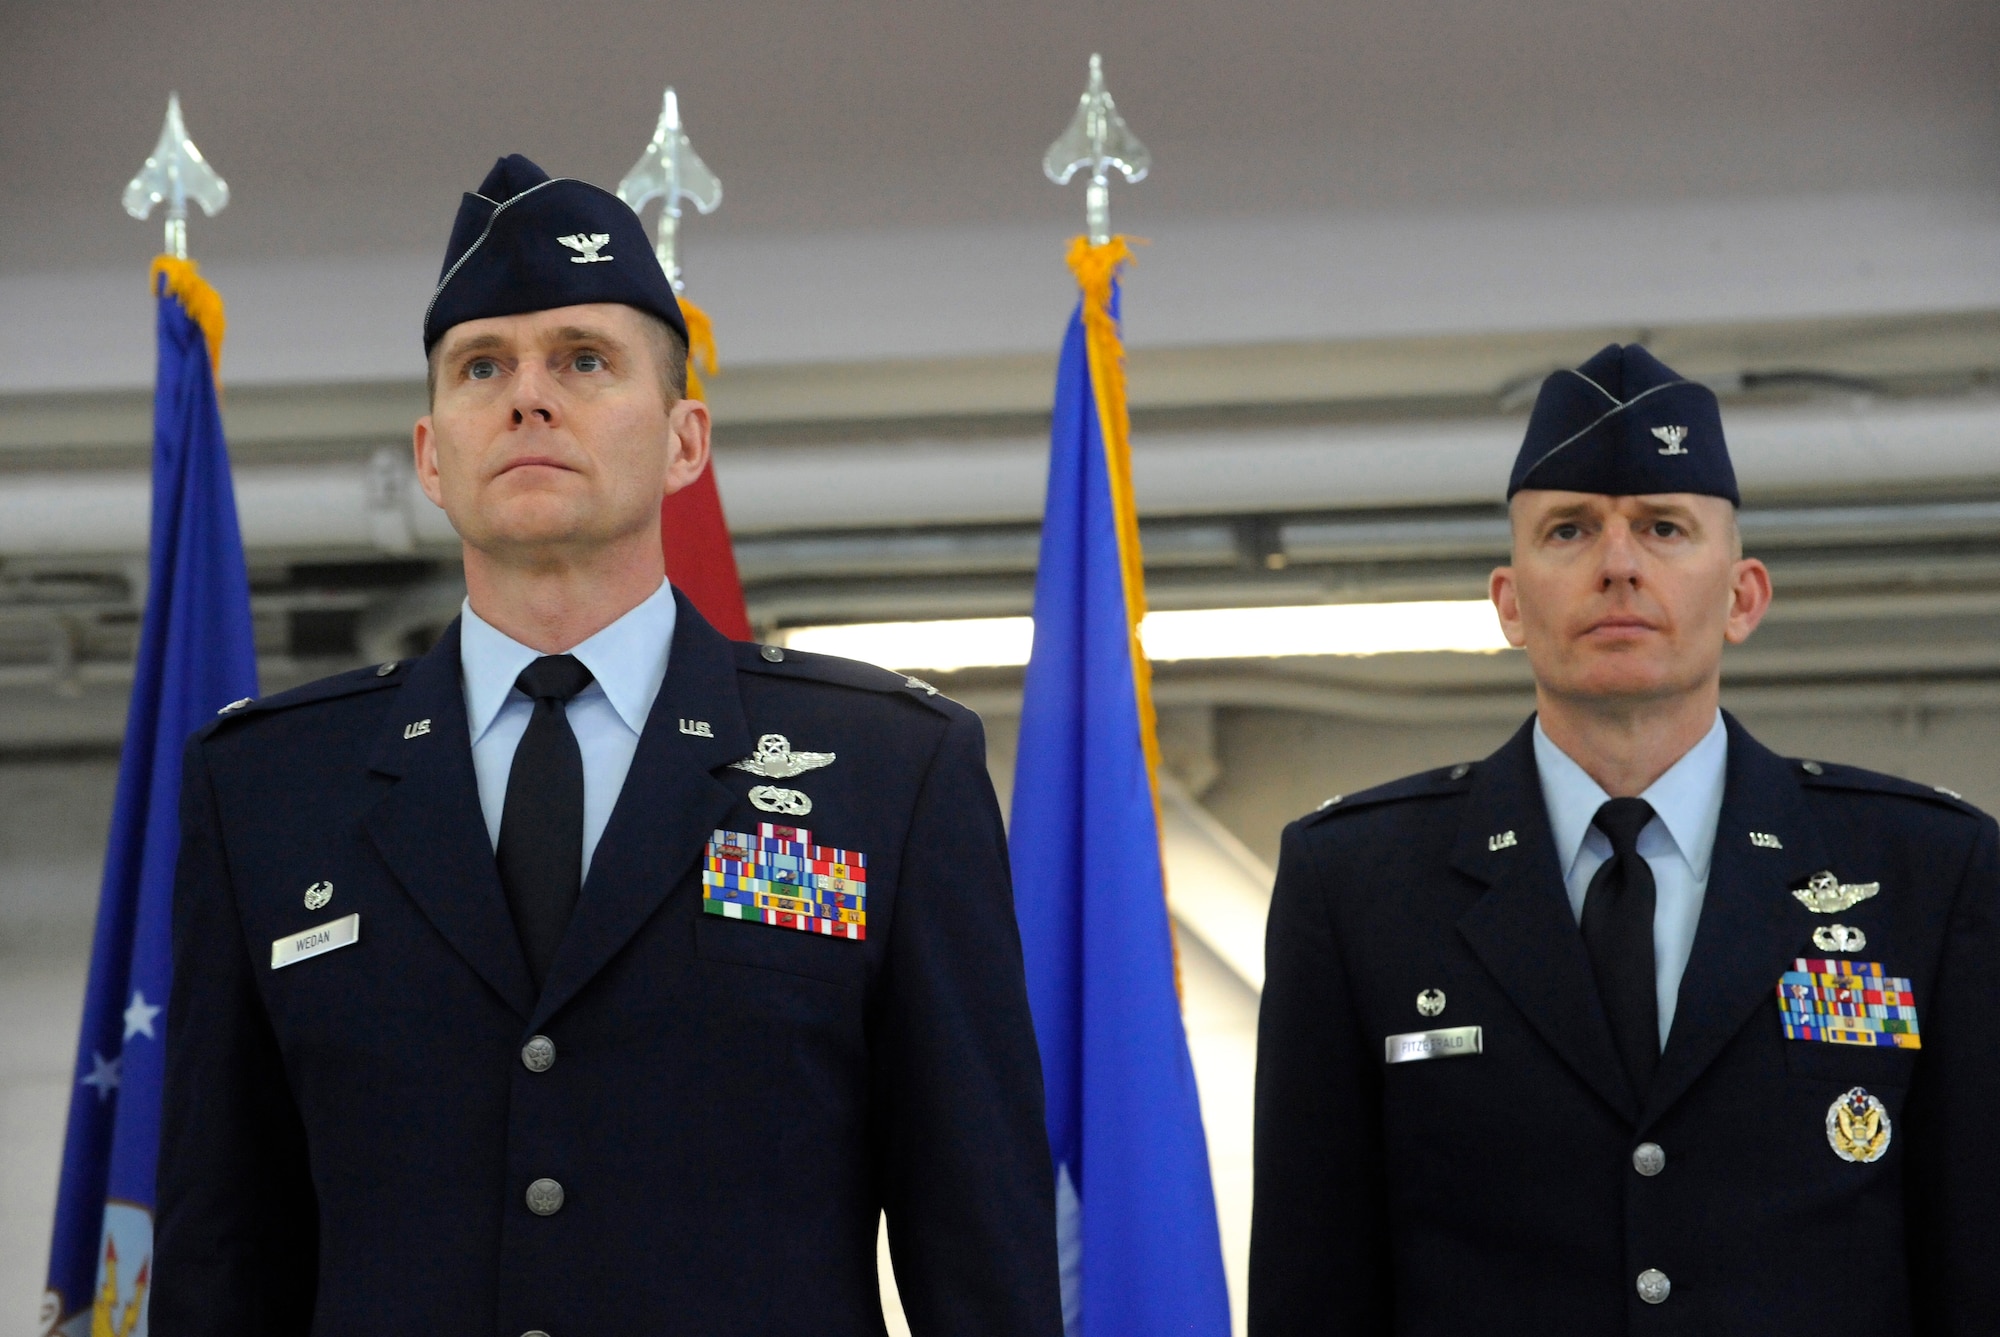 U.S. Air Force Col. Richard W. Wedan, outgoing commander 142nd Fighter Wing, left, and Col. Paul T. Fitzgerald, incoming commander 142nd Fighter Wing, right, stand at attention as orders for the citation for The Air Force Legion of Merit Medal are read and presented to Wedan during the Change of Command ceremony held Feb. 7, 2015, Portland Air National Guard Base, Ore. (U.S. Air National Guard photo by Tech. Sgt. John Hughel, 142nd Fighter Wing Public Affairs)